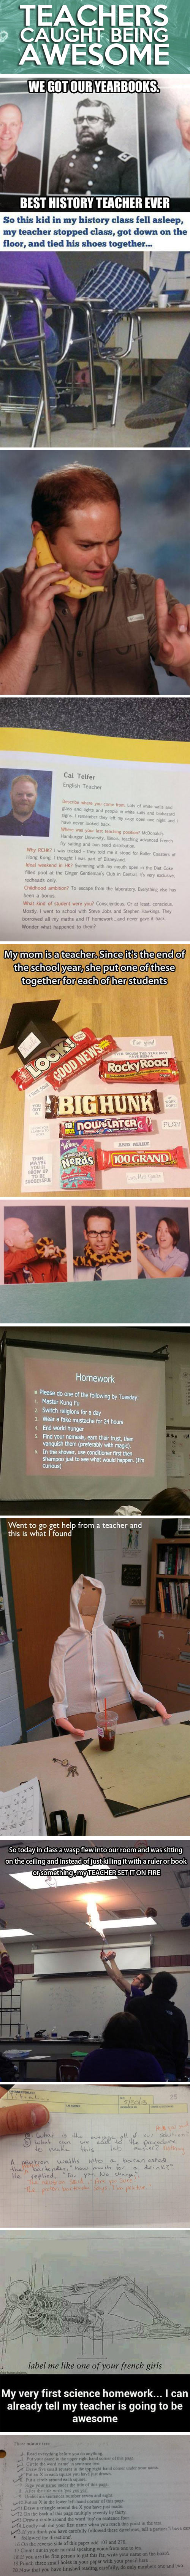 Teachers caught being awesome...